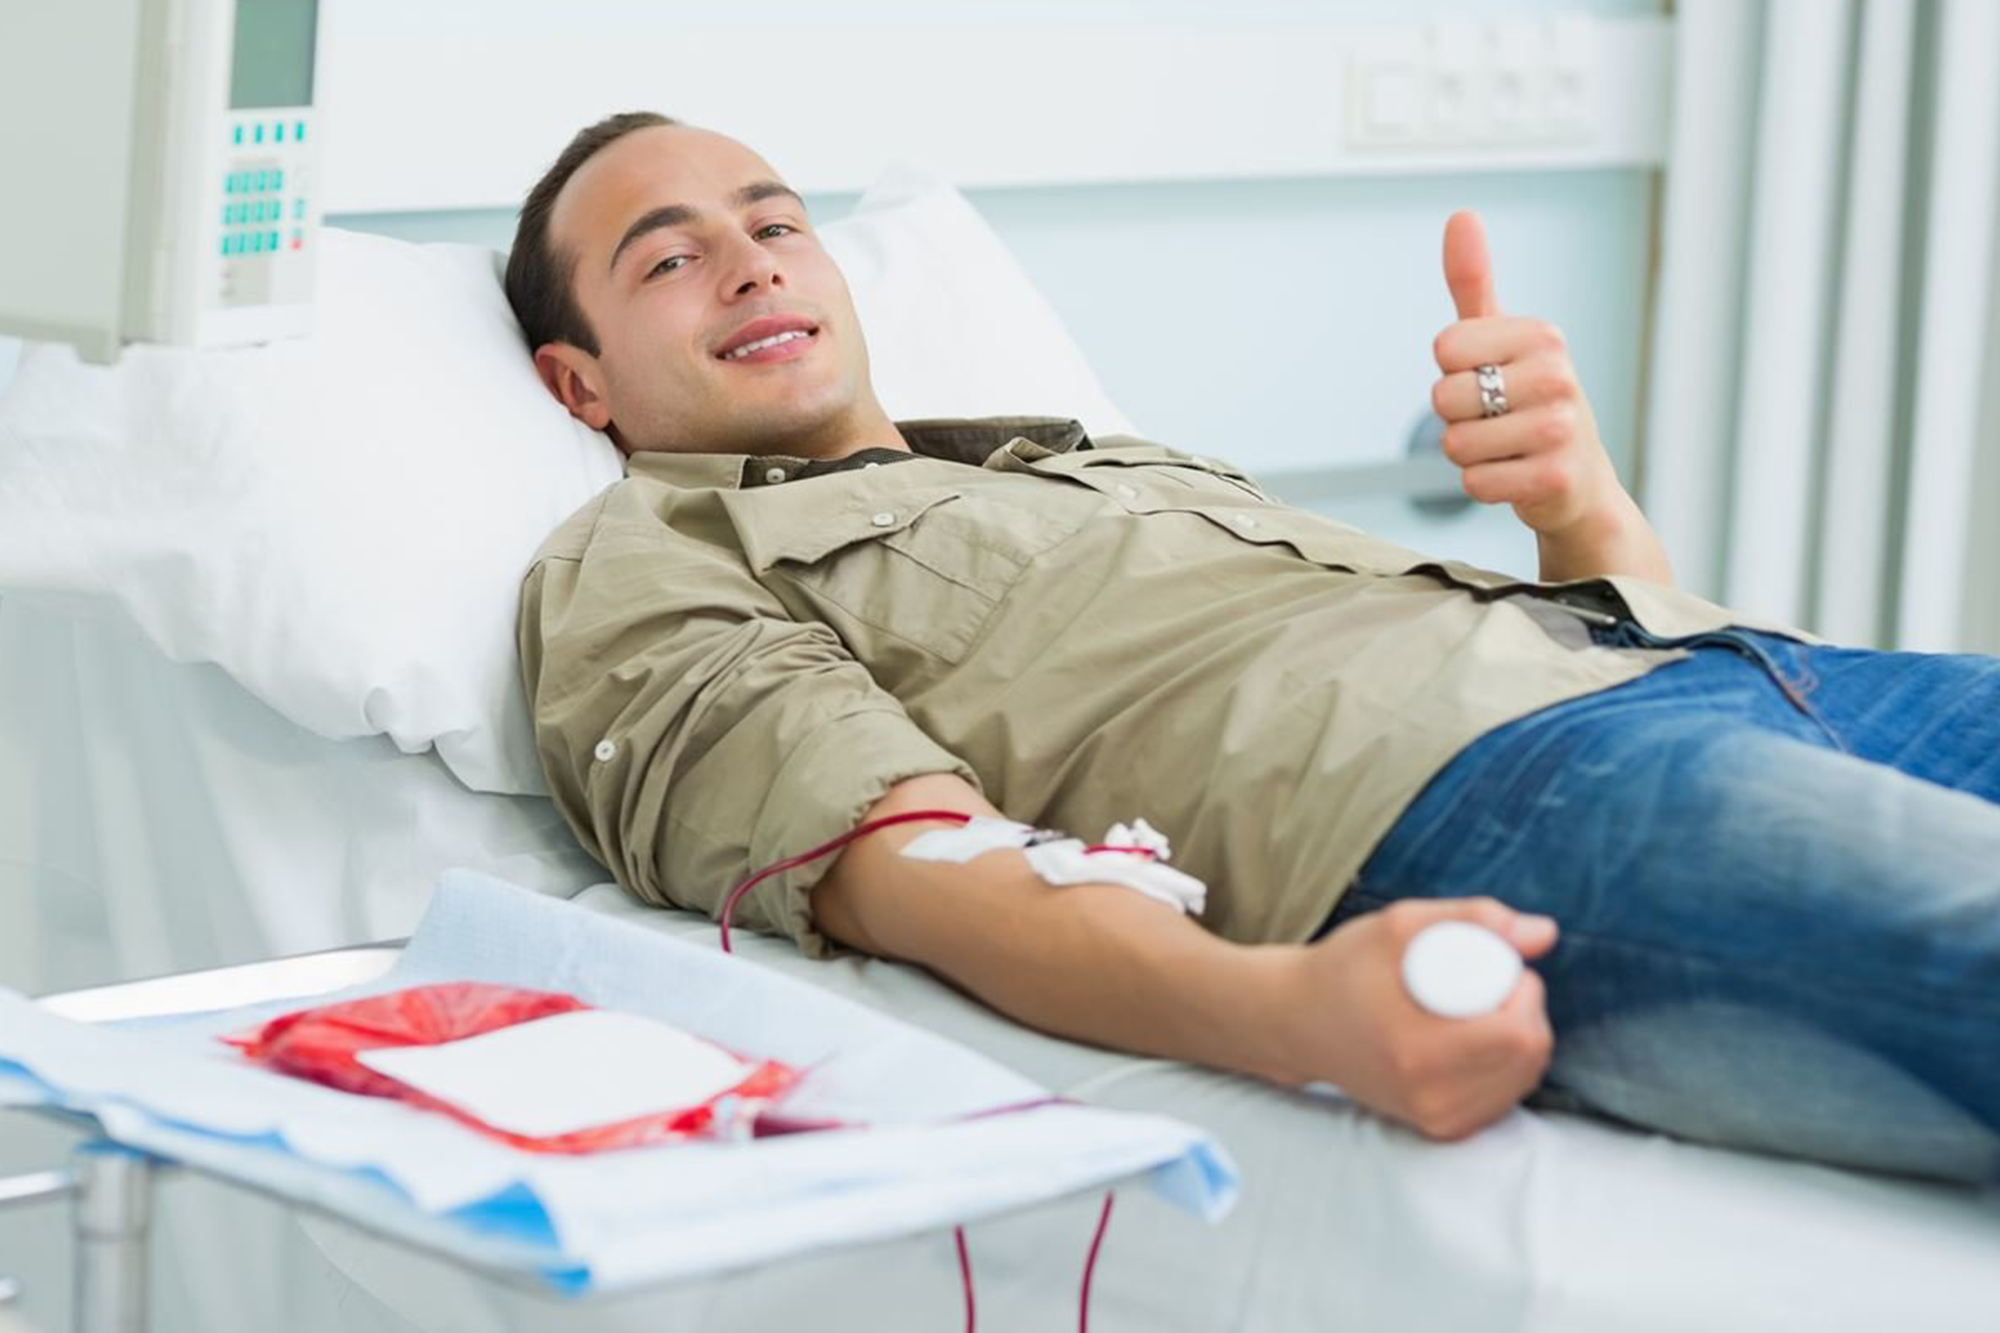 The do’s and don'ts of donating blood